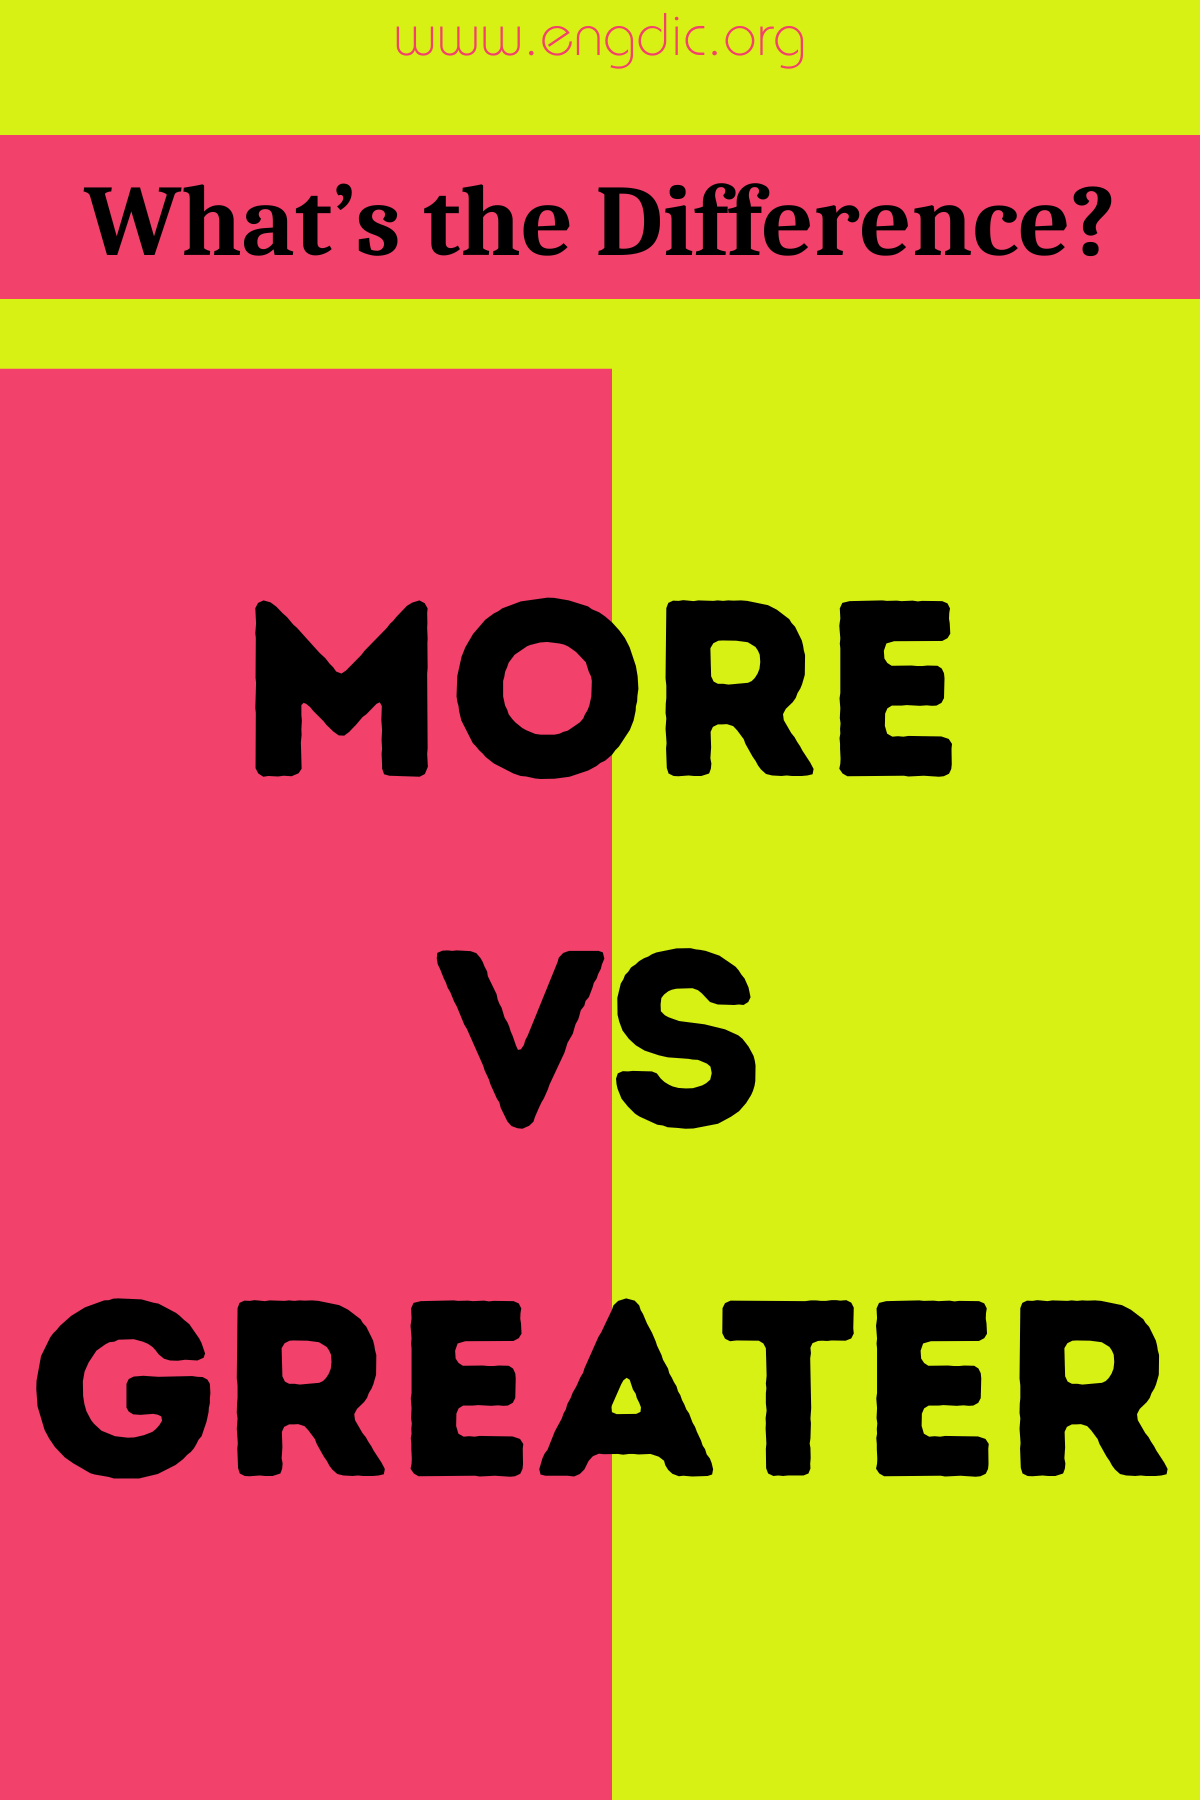 More vs Greater